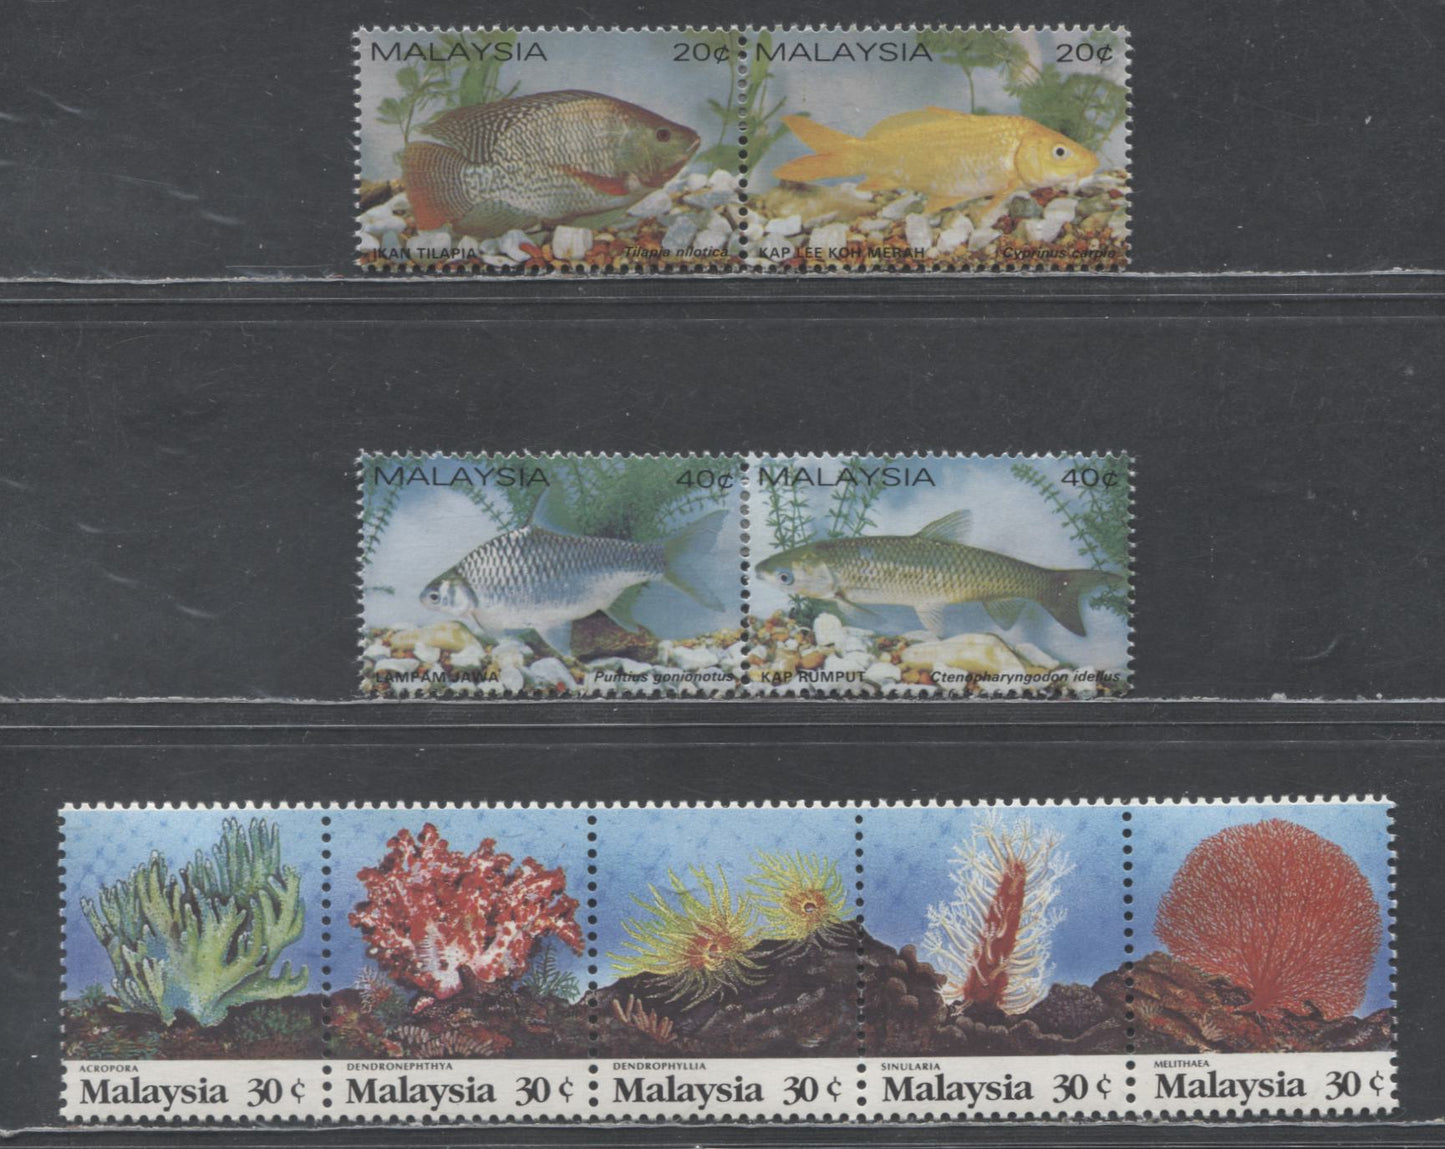 Lot 62 Malaysia SC#257/471 1983-1992 Fish & Coral Issues, 3 VFOG Pairs & Strip Of 5, Click on Listing to See ALL Pictures, 2017 Scott Cat. $17.5